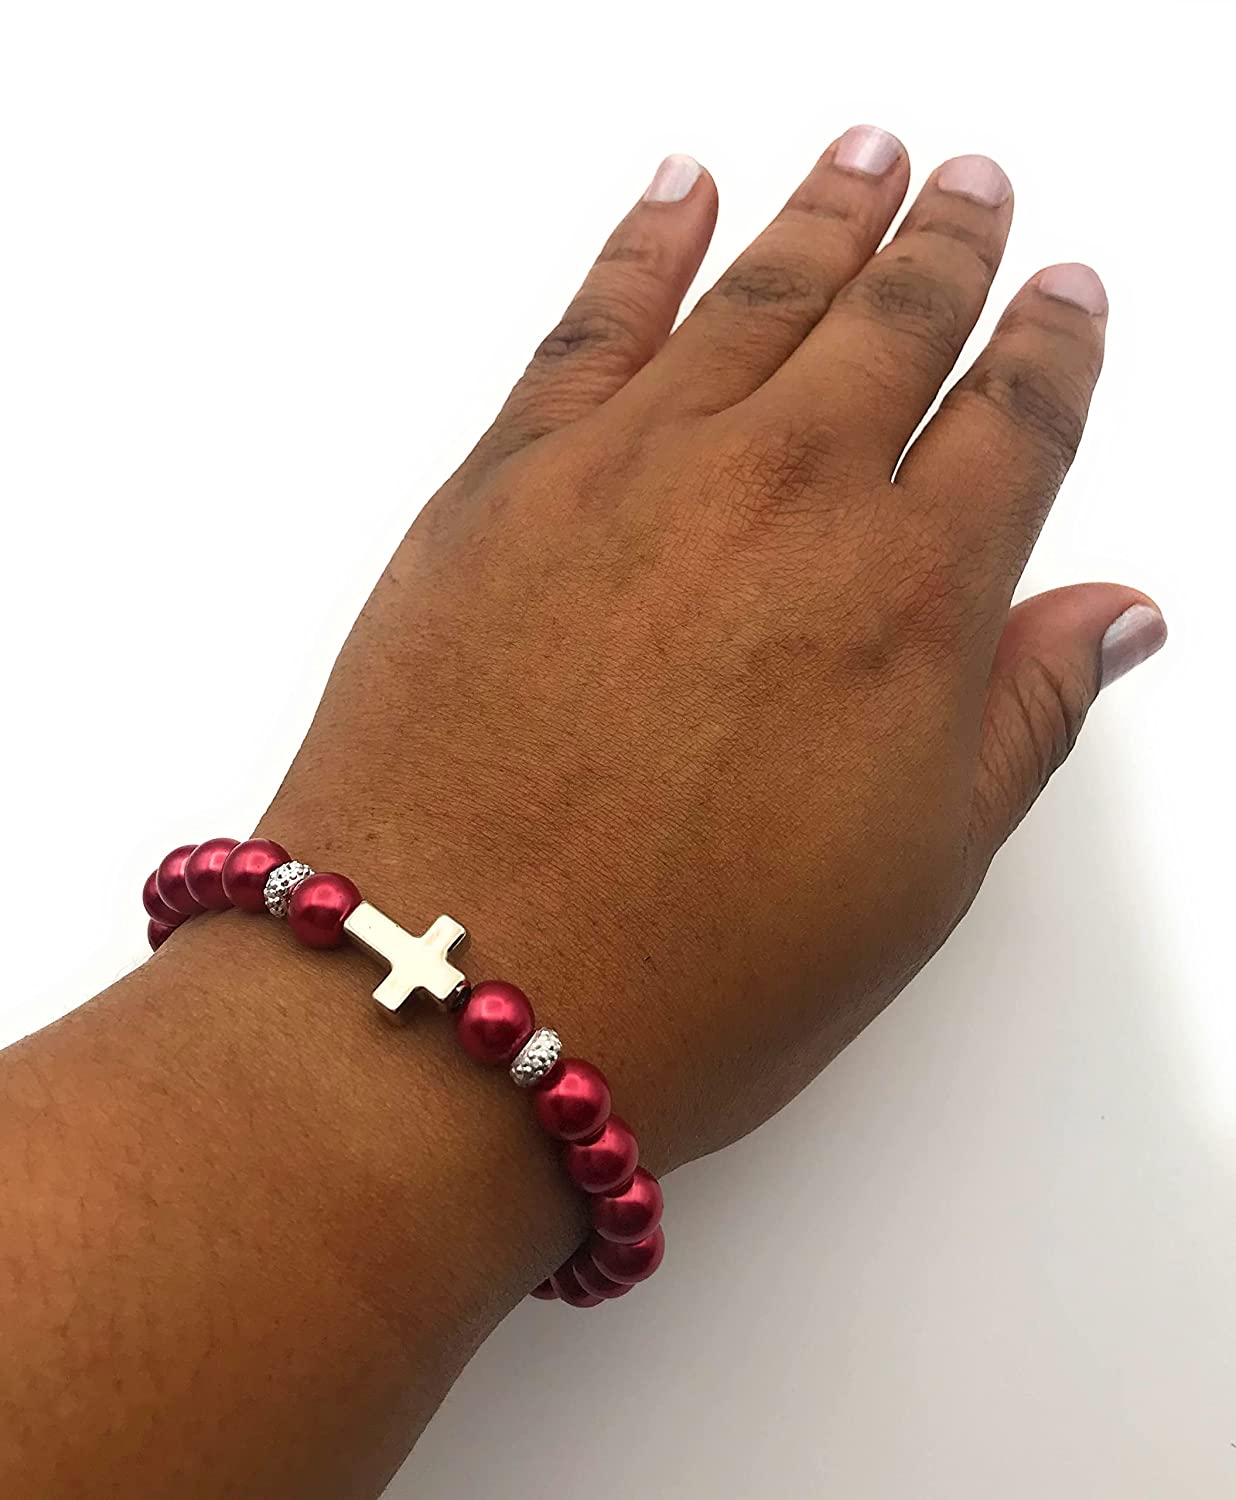 Red Faux Pearl Beaded Stretch Bracelet Cross Accent on Wrist from Scott D Jewelry Designs